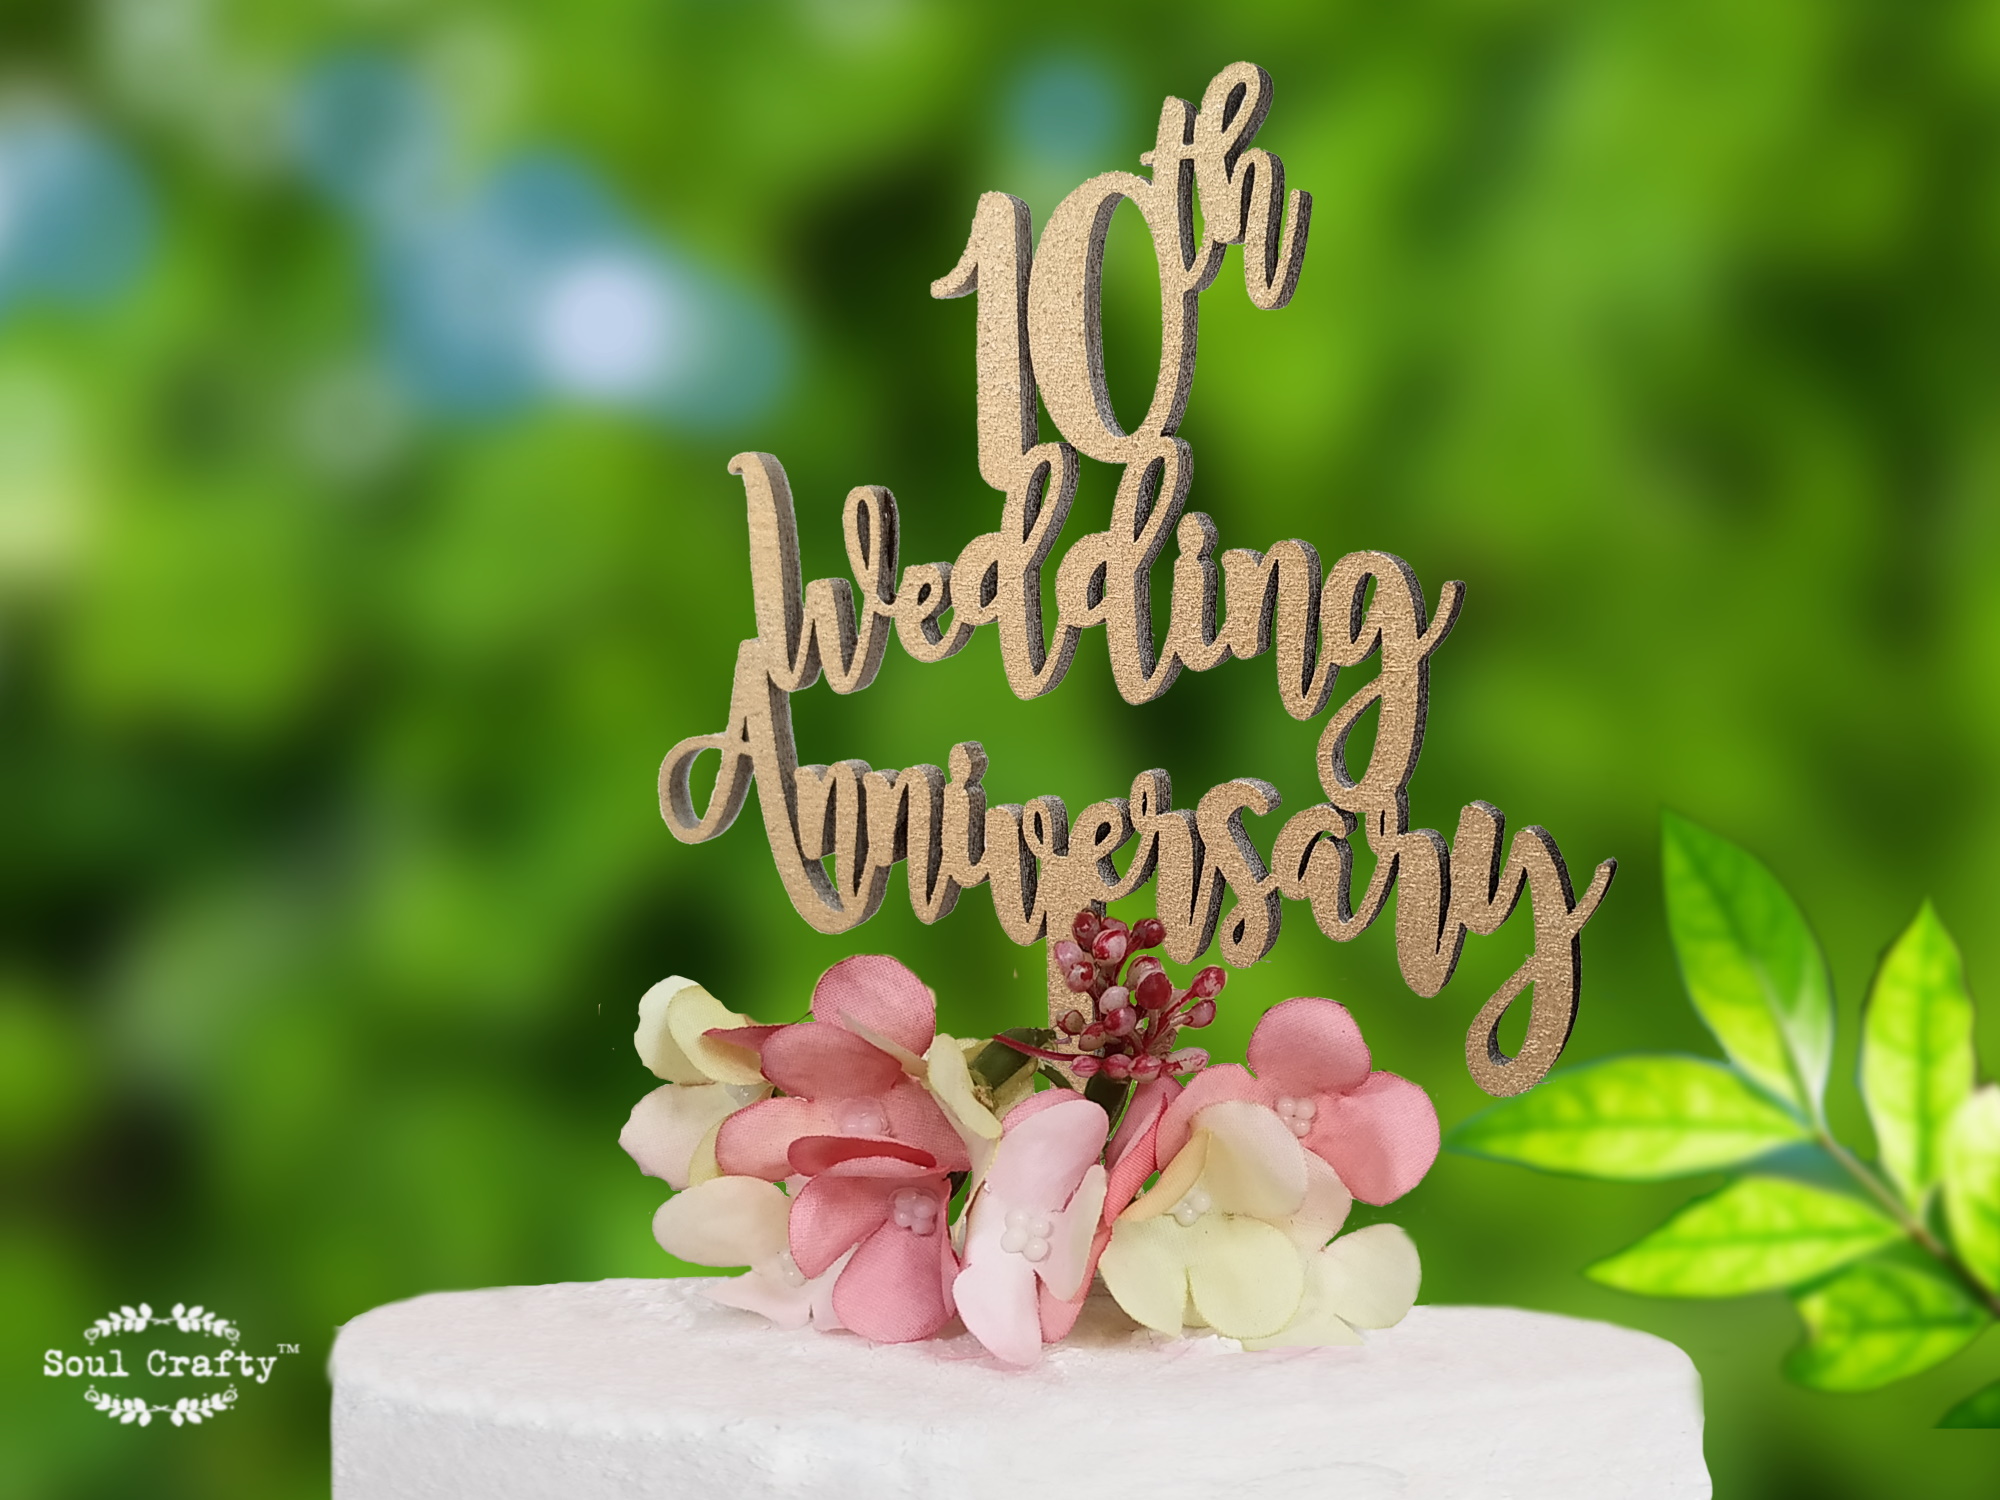 Atelier Elegance 5 Years of Wedded Bliss Cake Topper 5th Anniversary Cake Topper Five